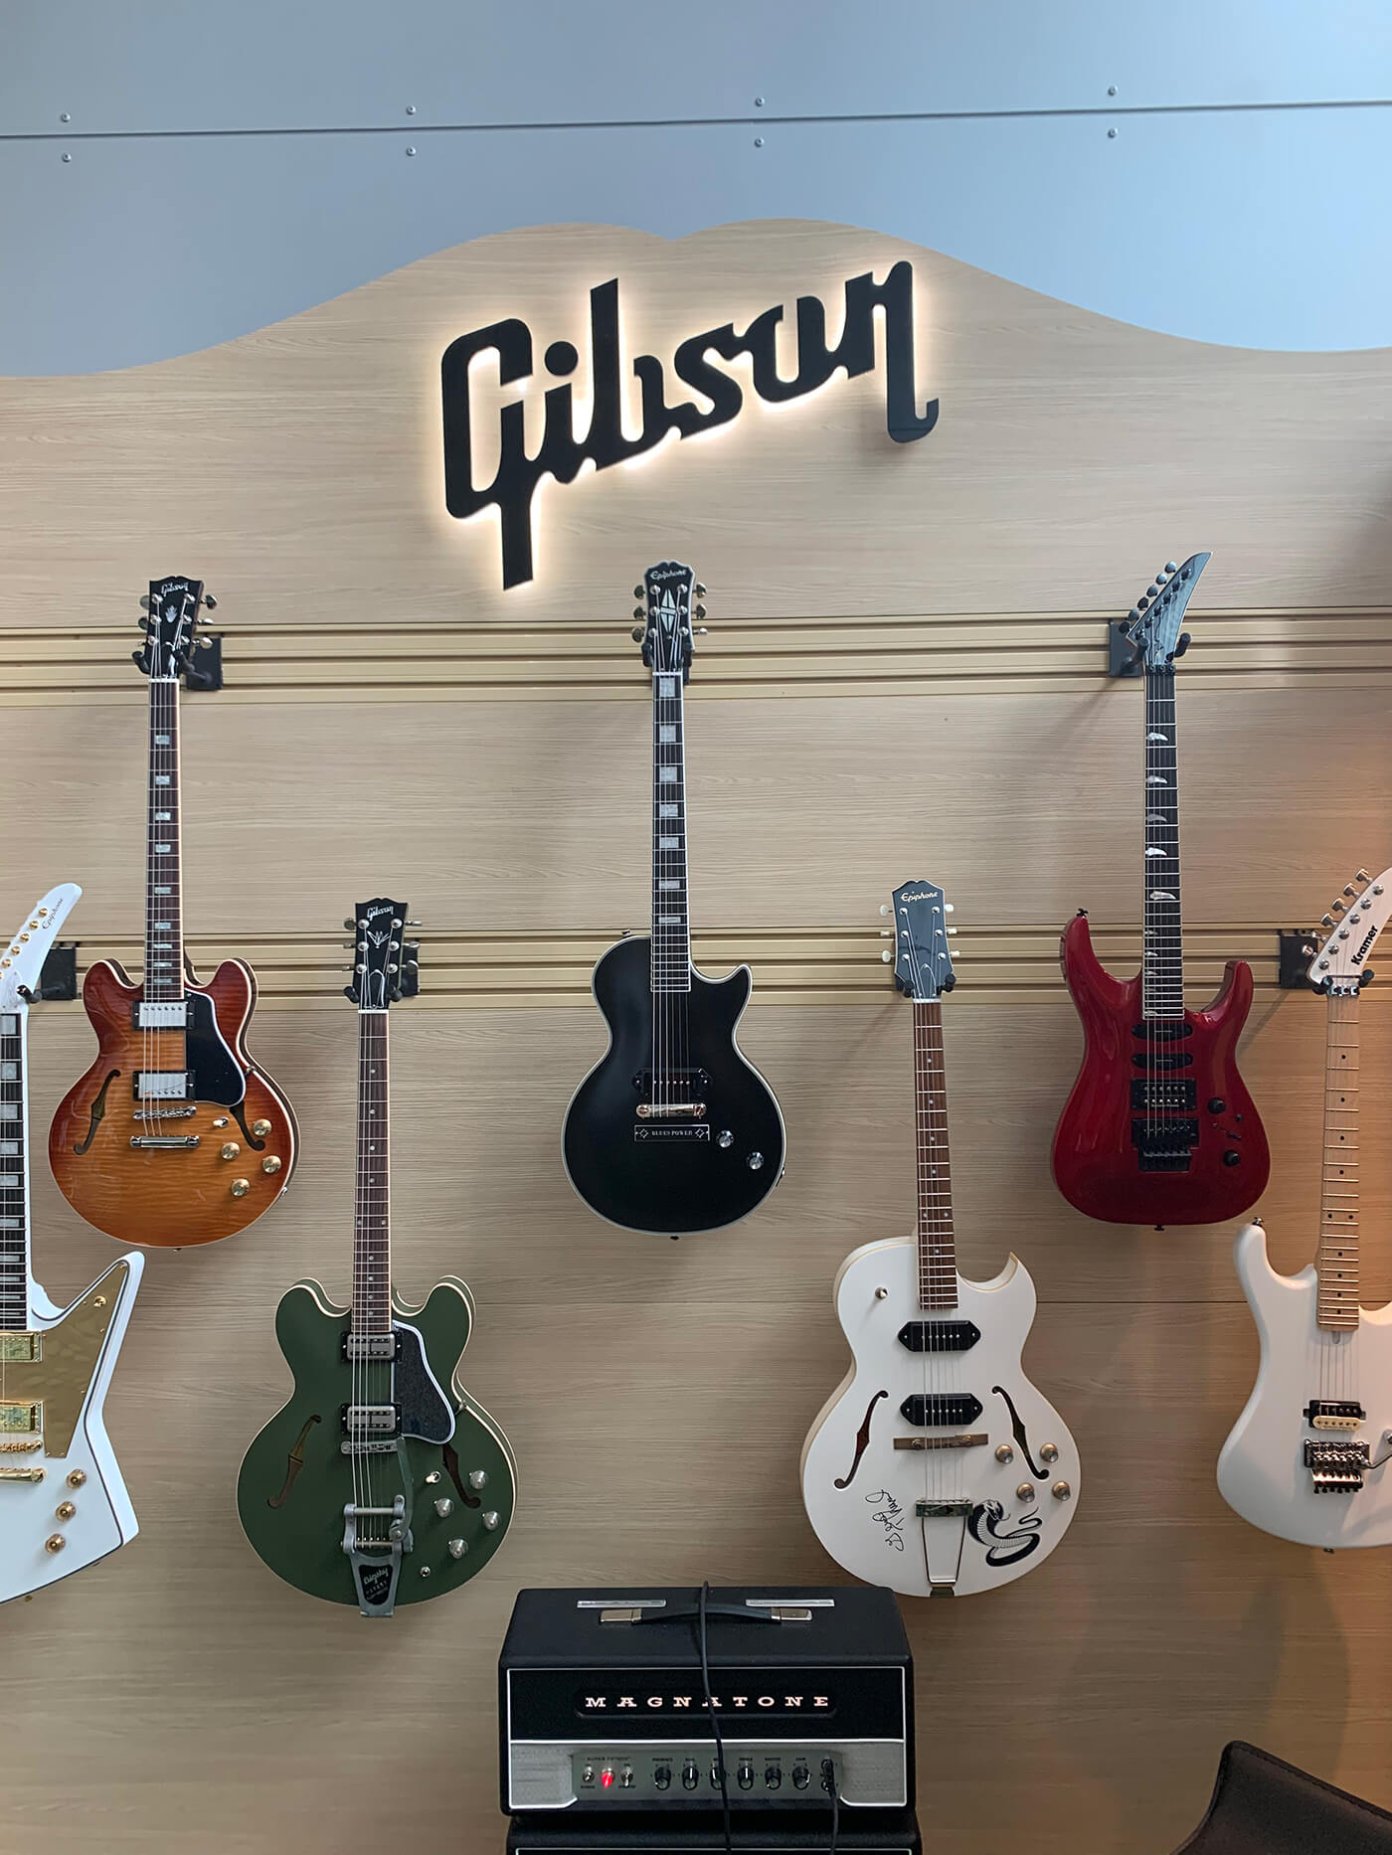 In Pictures New Gibson guitars at Summer NAMM 2019